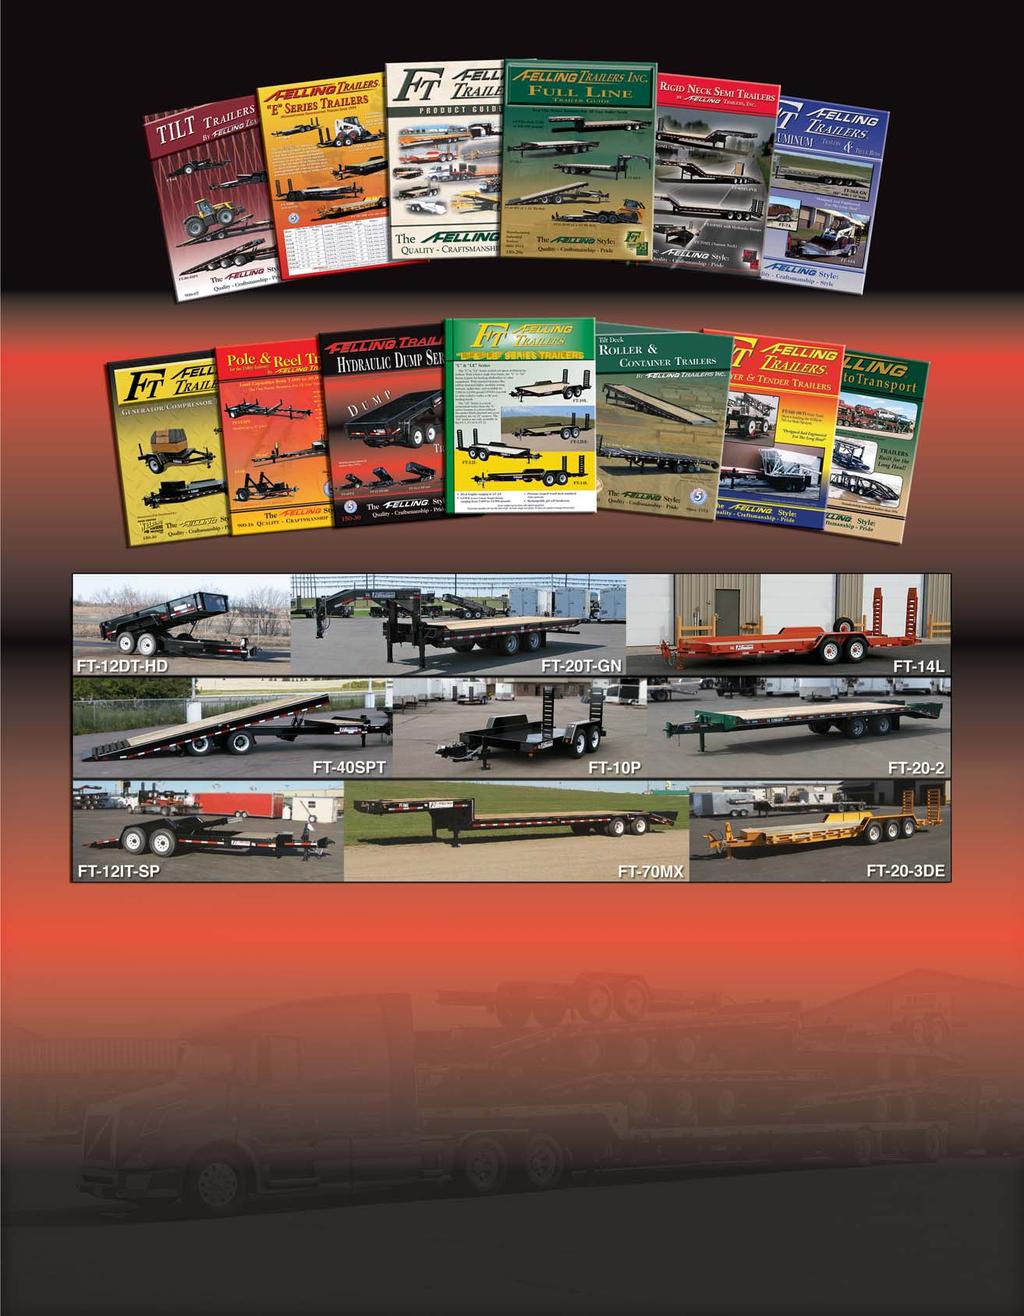 To learn more about us, have us mail you a specific full color brochure, or locate your nearest dealer, go to www.felling.com or give us a call at 1-800-245-2809.